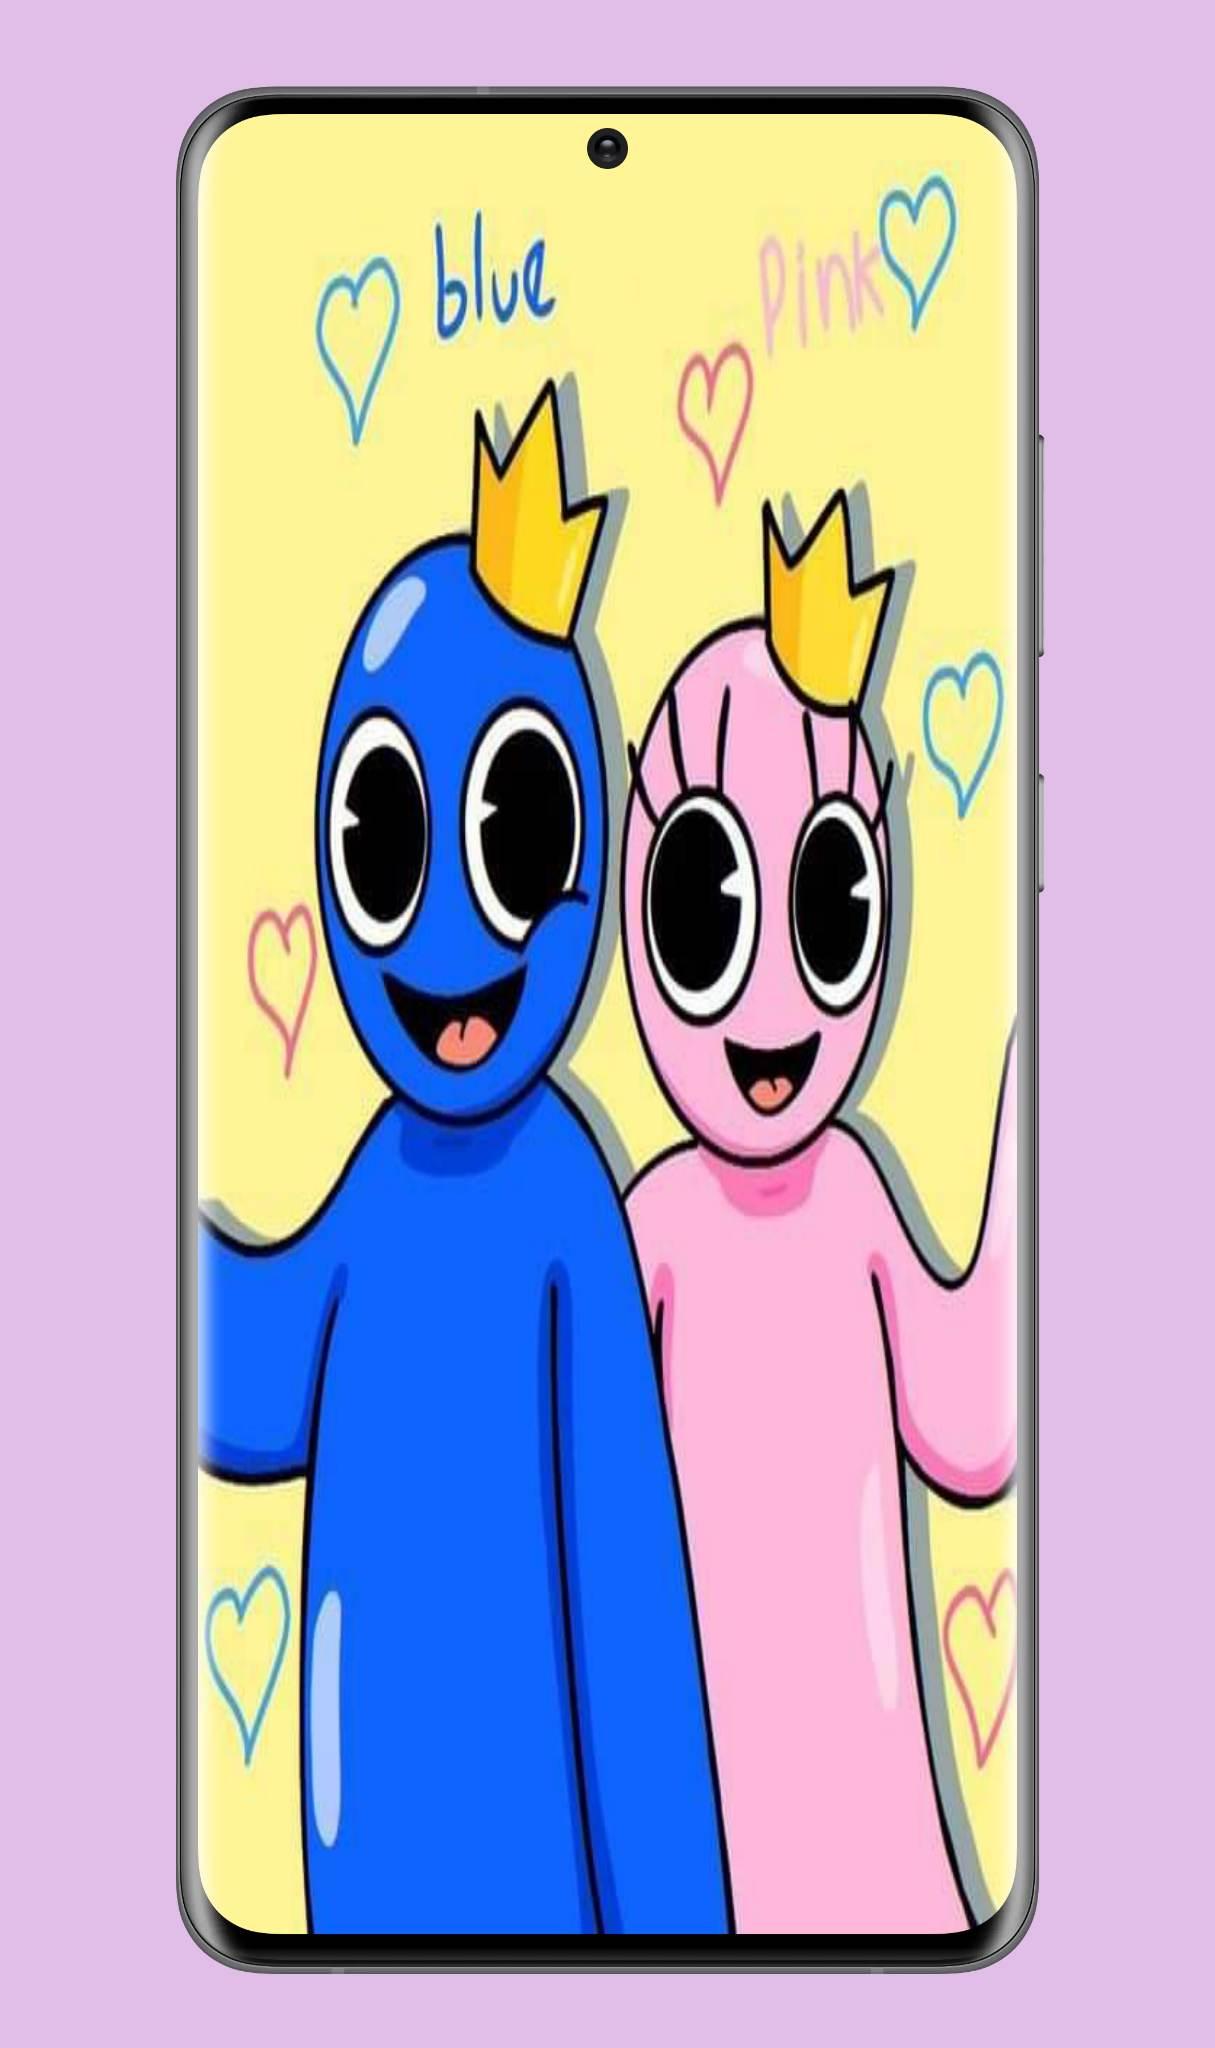 Rainbow Friends Wallpaper::Appstore for Android